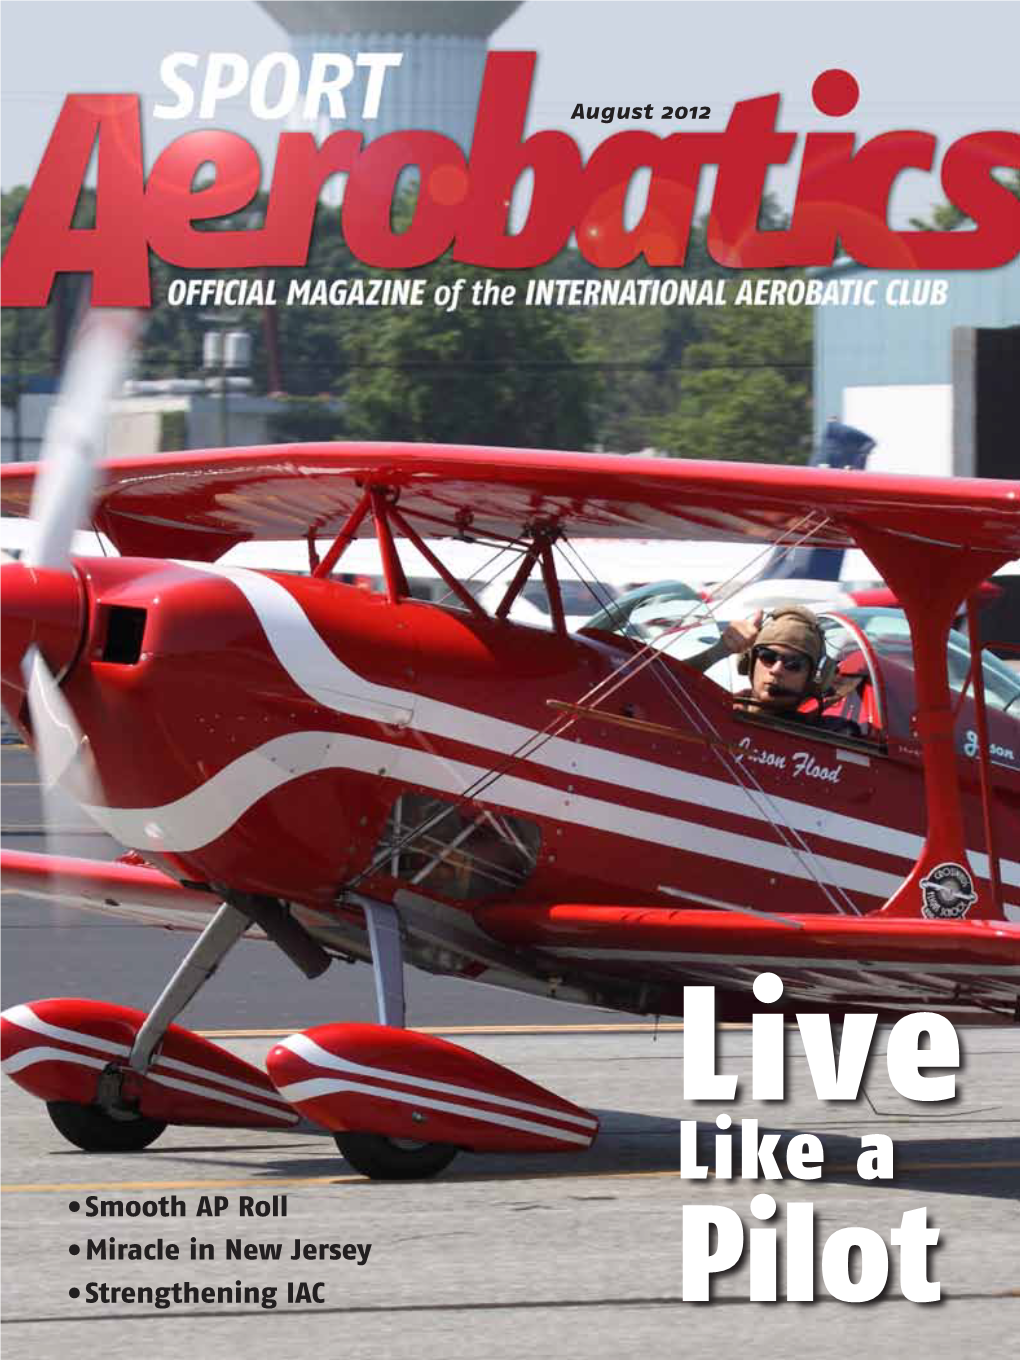 Like a •Smooth AP Roll •Miracle in New Jersey •Strengthening IAC Pilot OFFICIAL MAGAZINE of the INTERNATIONAL AEROBATIC CLUB